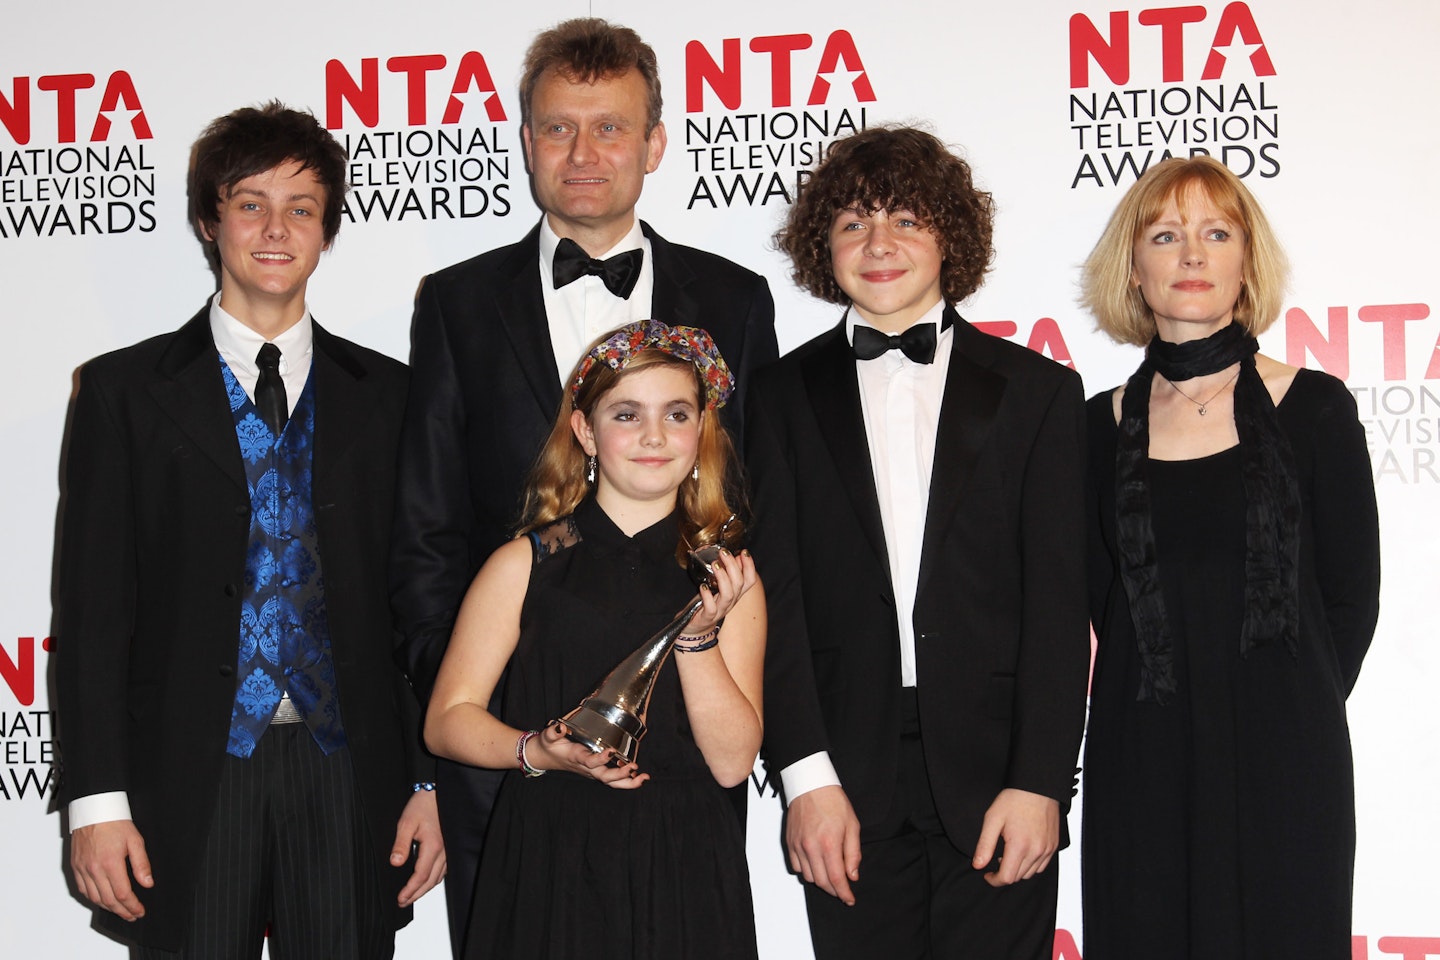 Outnumbered cast now